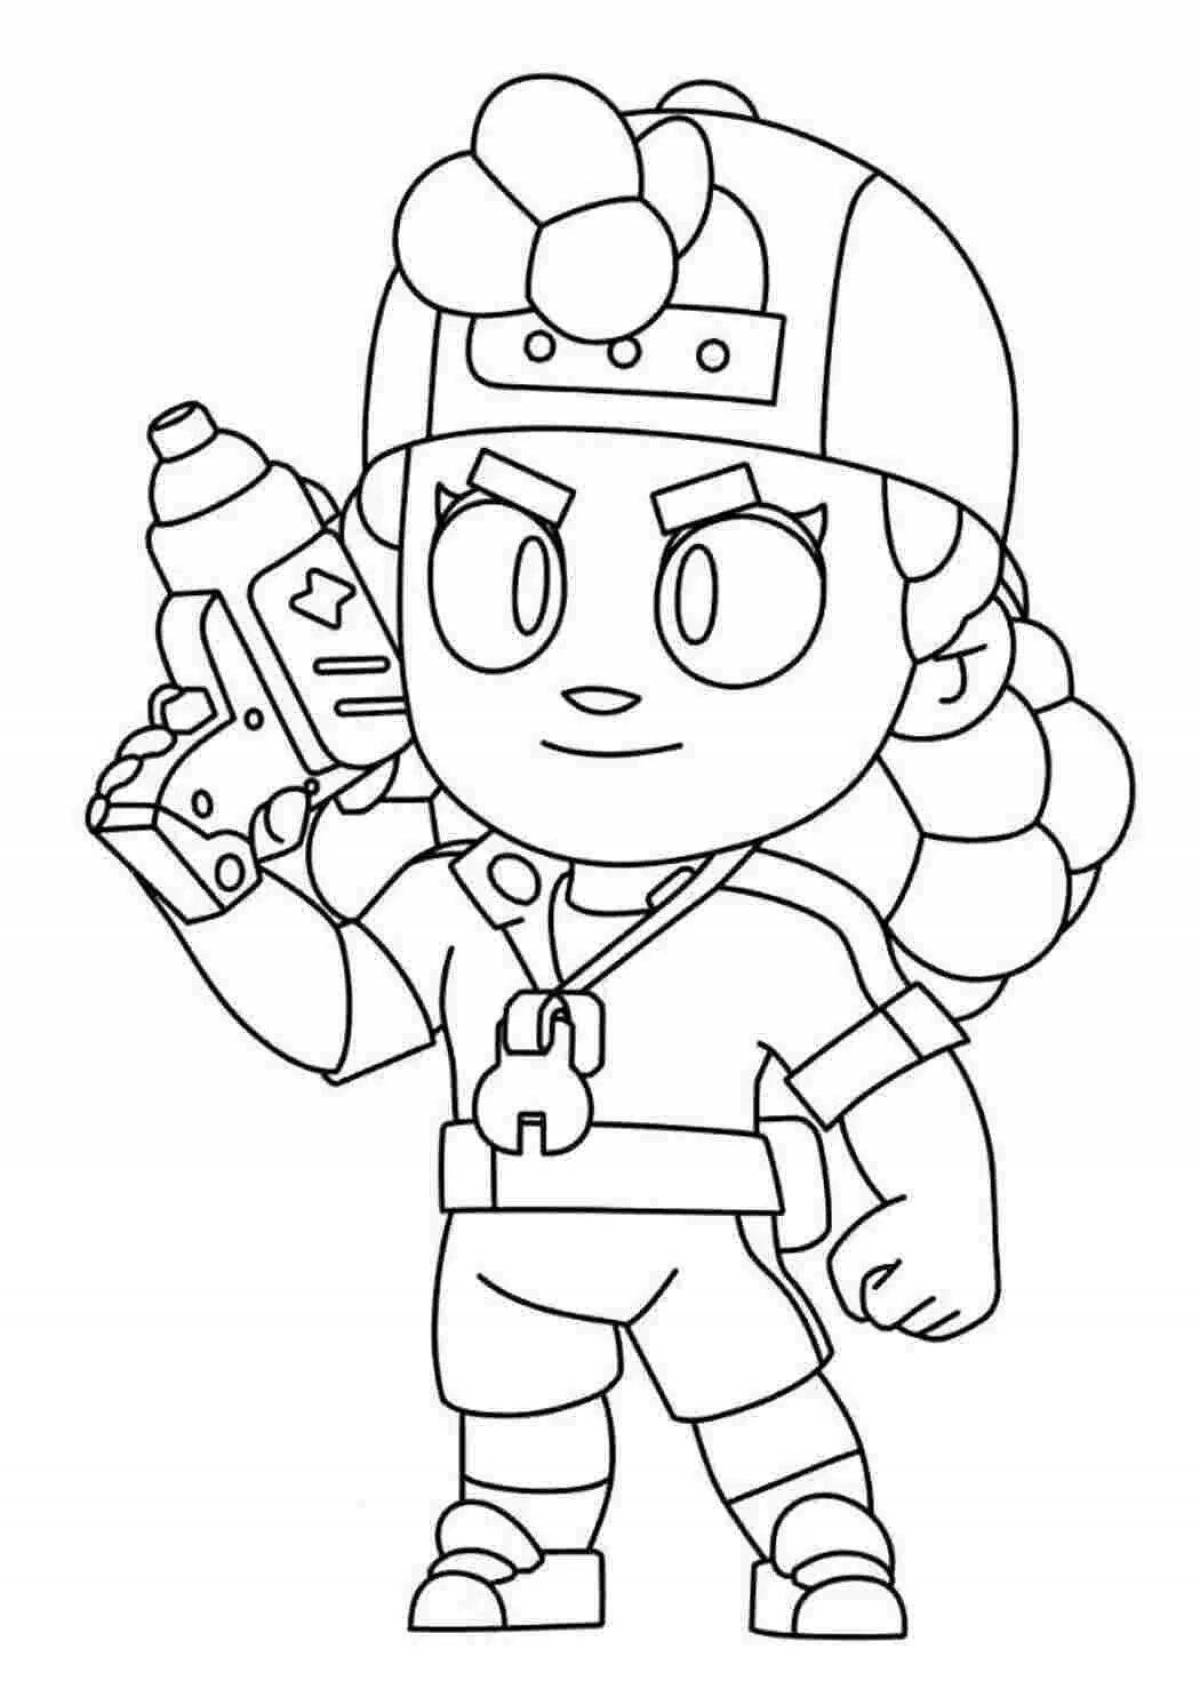 Shiny blue star coloring page